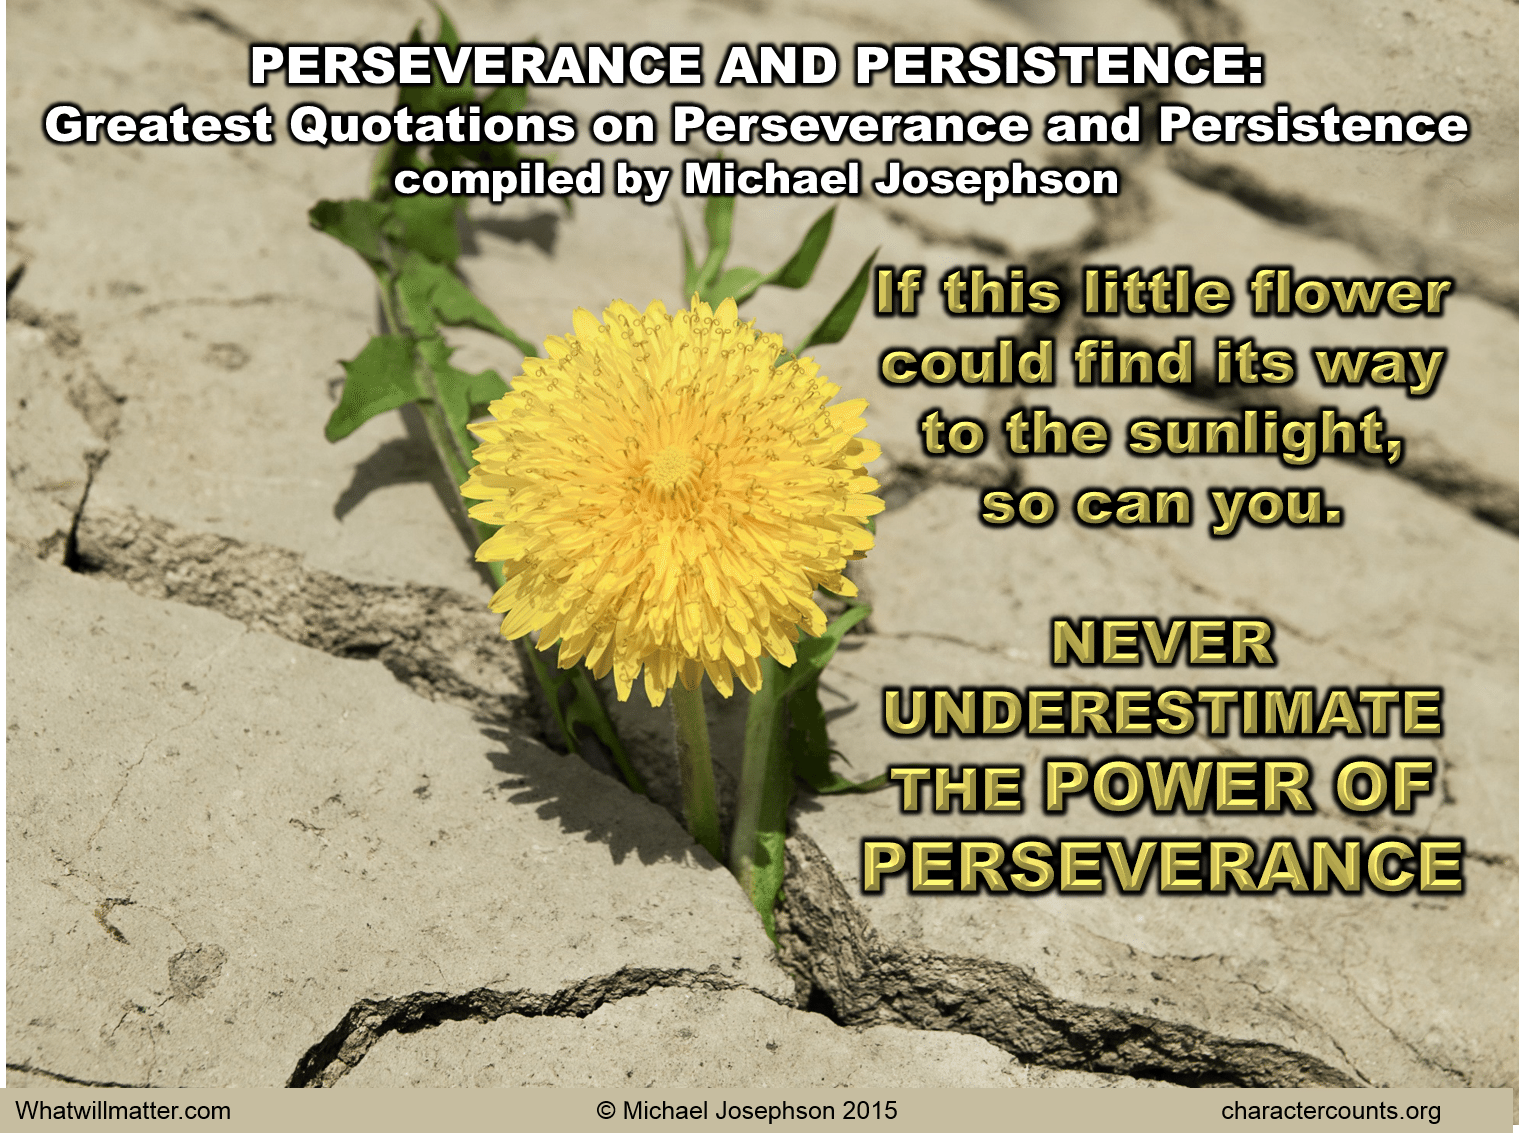 PERSEVERANCE & PERSISTENCE  Greatest Quotations on Perseverance and Persistence compiled by Michael Josephson. If this little flower could find its way to the sunlight so can you..